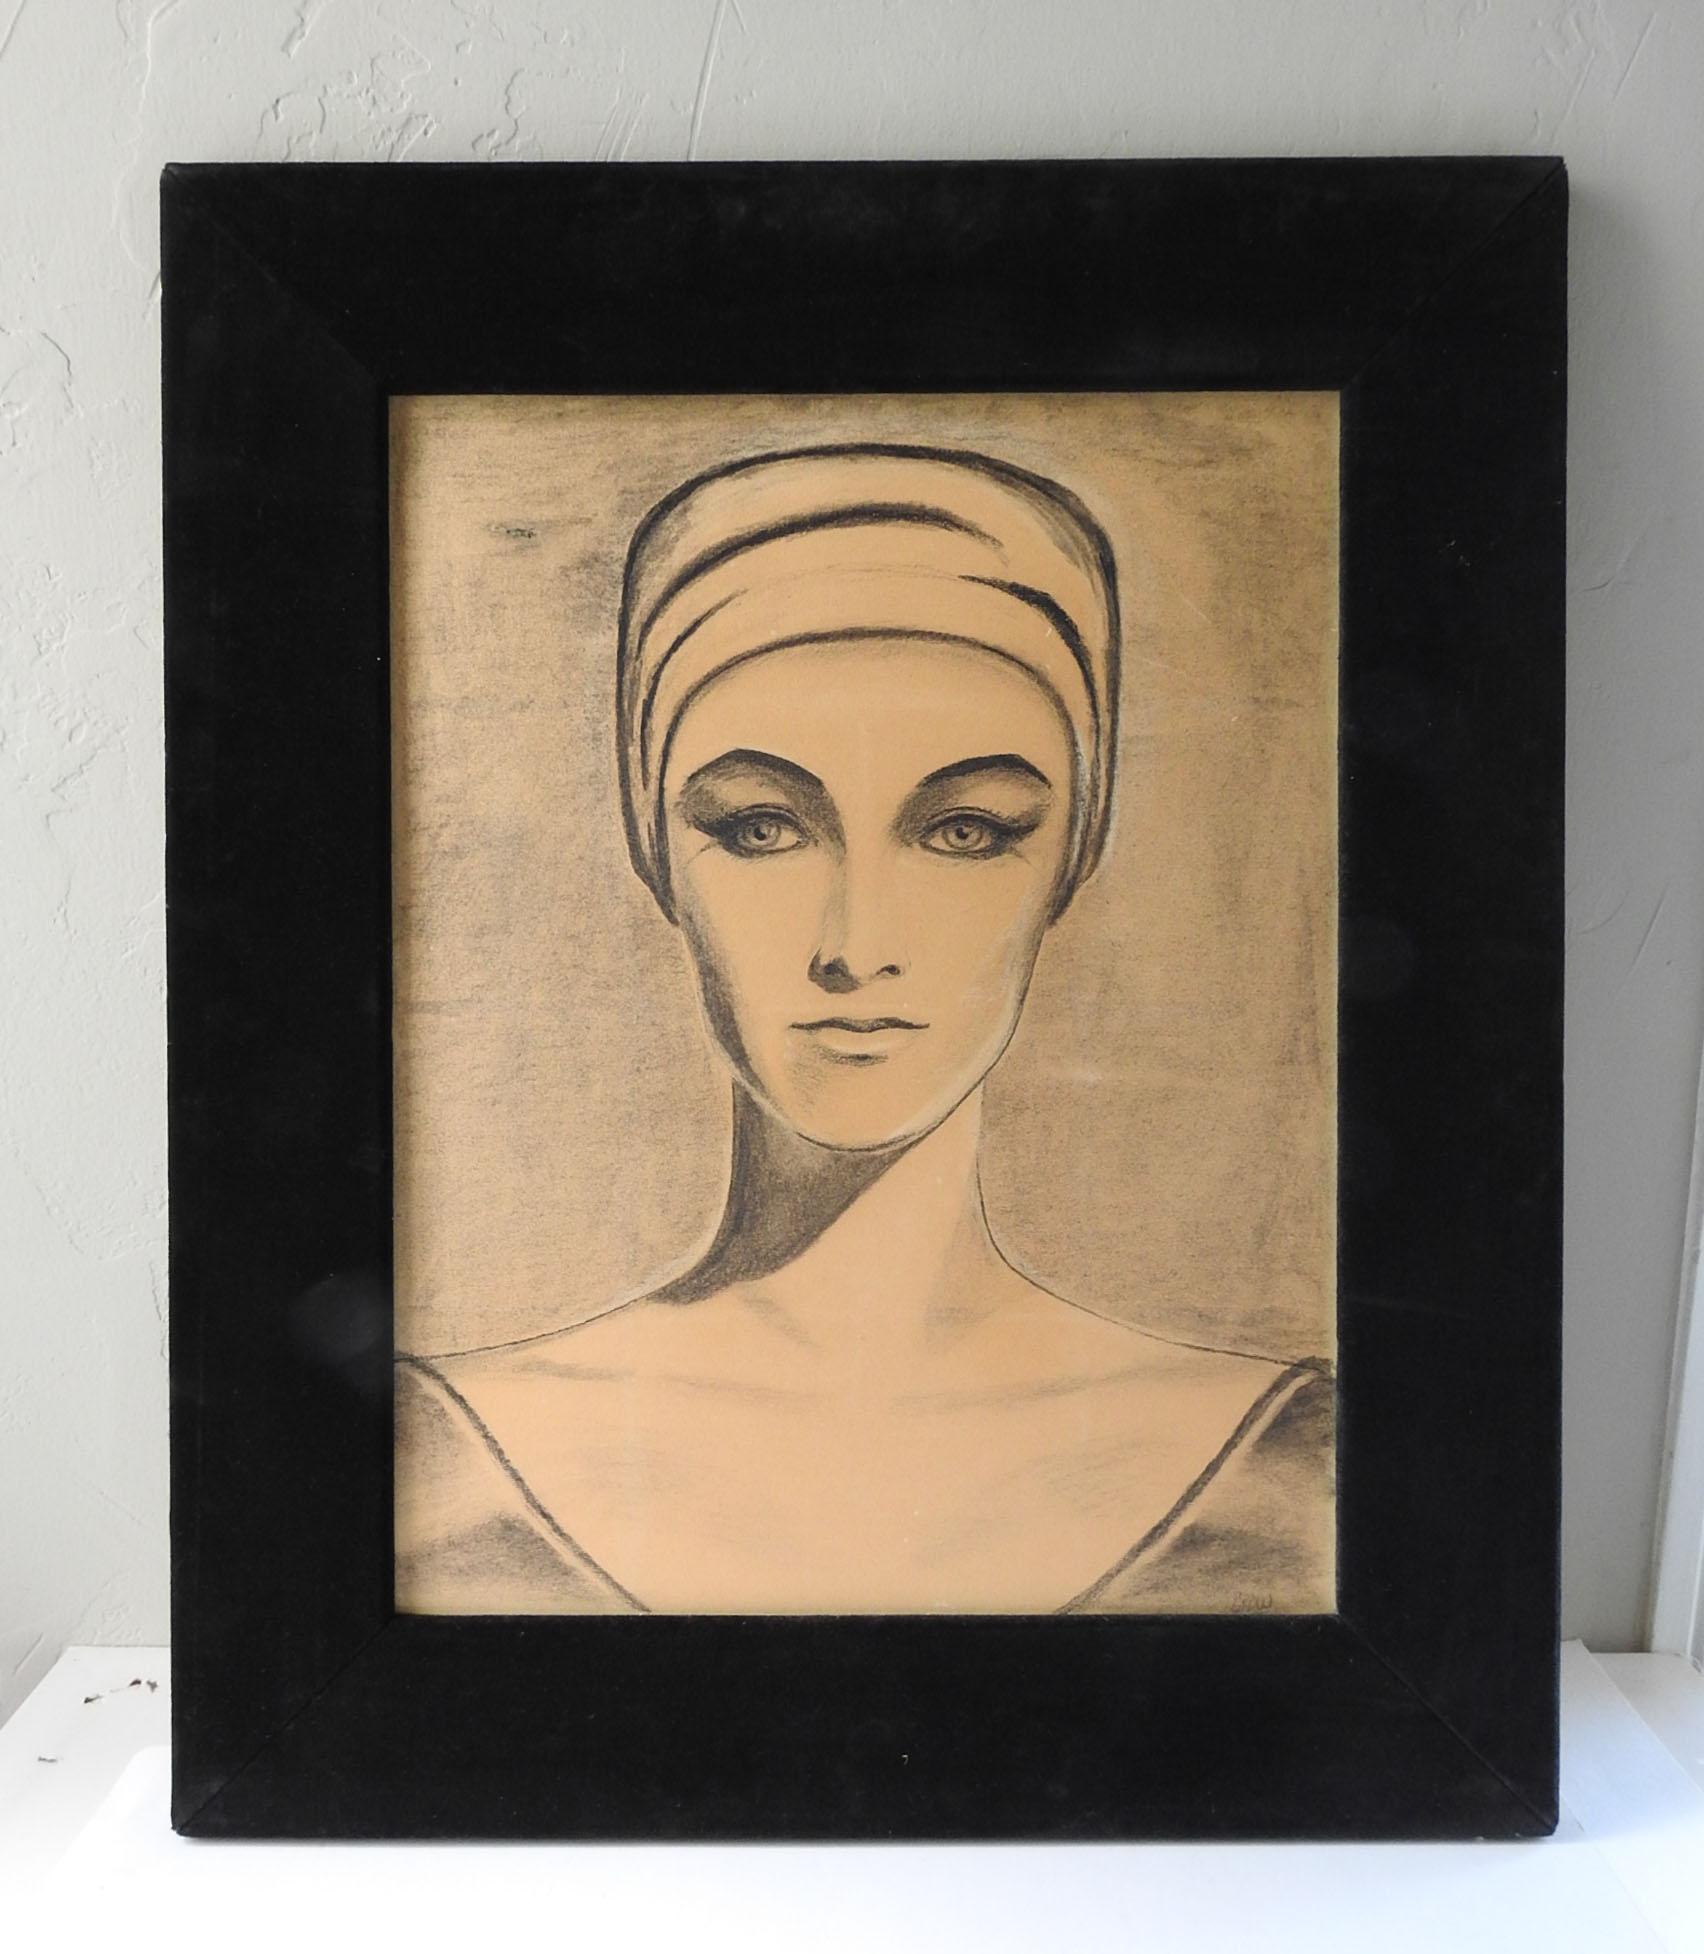 Vintage mid century charcoal on paper portrait drawing of elegant woman.  Signed Crow lower right corner.  Displayed in black velvet over wood frame, no glass, age toning, scuff to paper upper left corner.